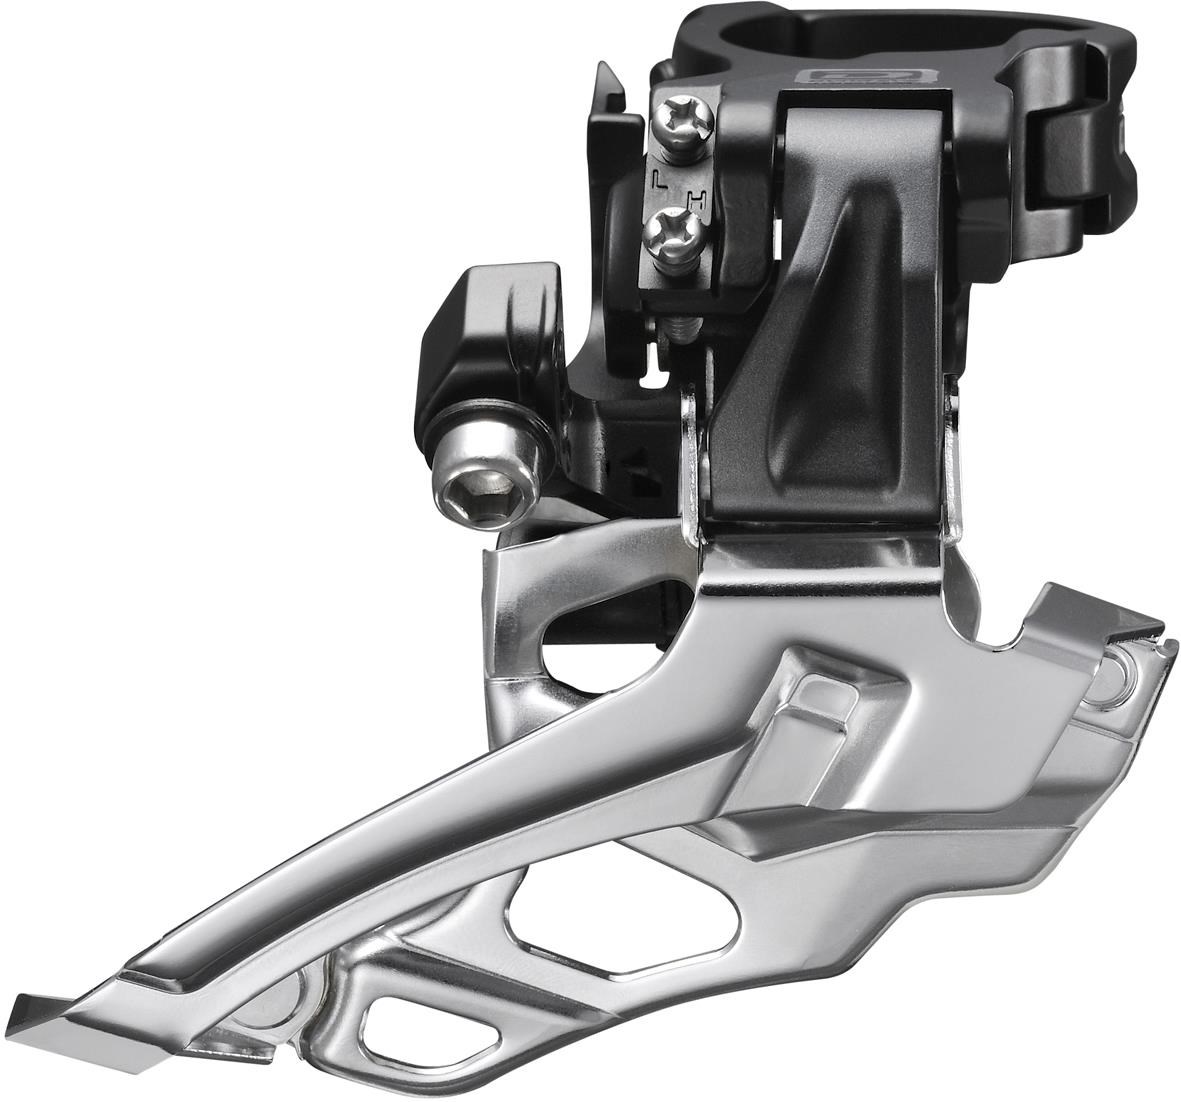 Shimano FD-M616 Deore 10 Speed Double Front Derailleur